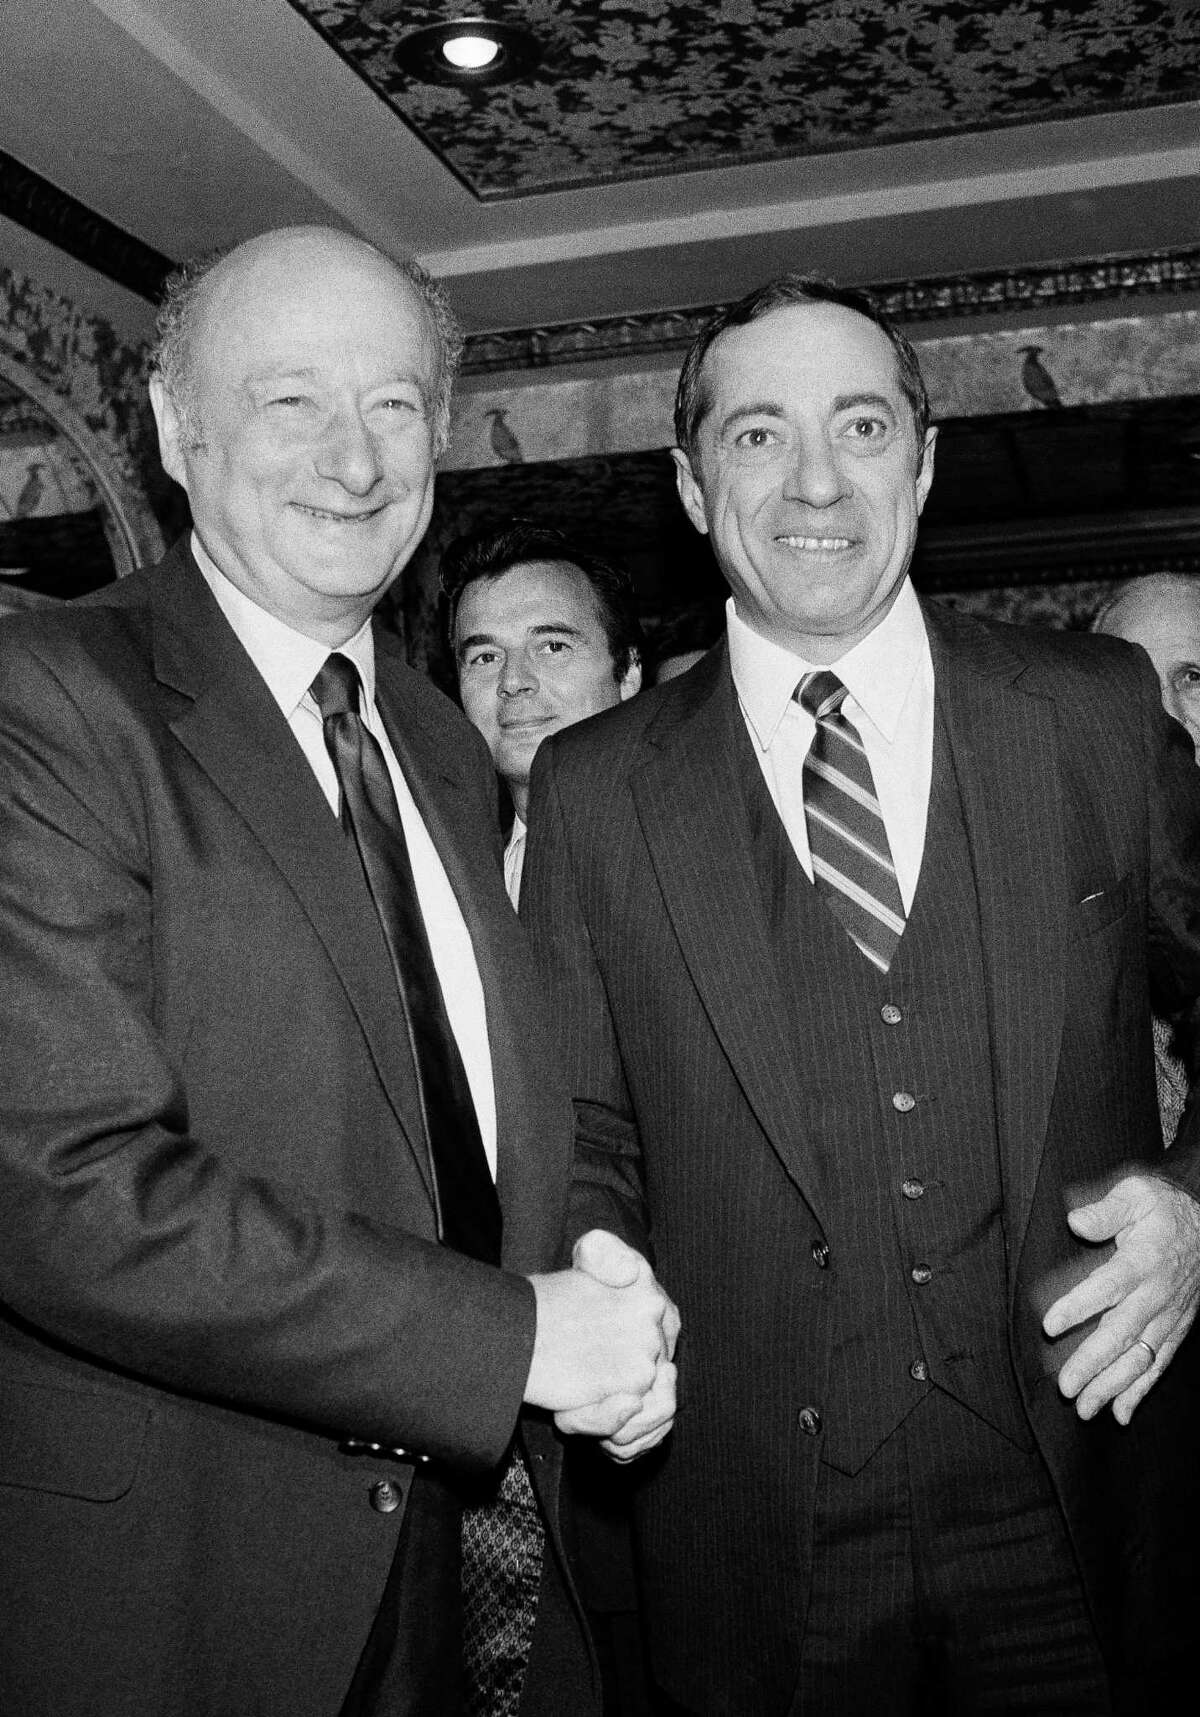 FILE - In this Sept. 21, 1982, file photo, New York Democratic gubernatorial candidates, New York Mayor Edward Koch, left, and New York Lt. Gov. Mario Cuomo, shake hands before starting their debate in New York. Cuomo, a three-term governor of New York, died Thursday, Jan. 1, 2015, the day his son Andrew started his second term as governor, the New York governor’s office confirmed. He was 82.